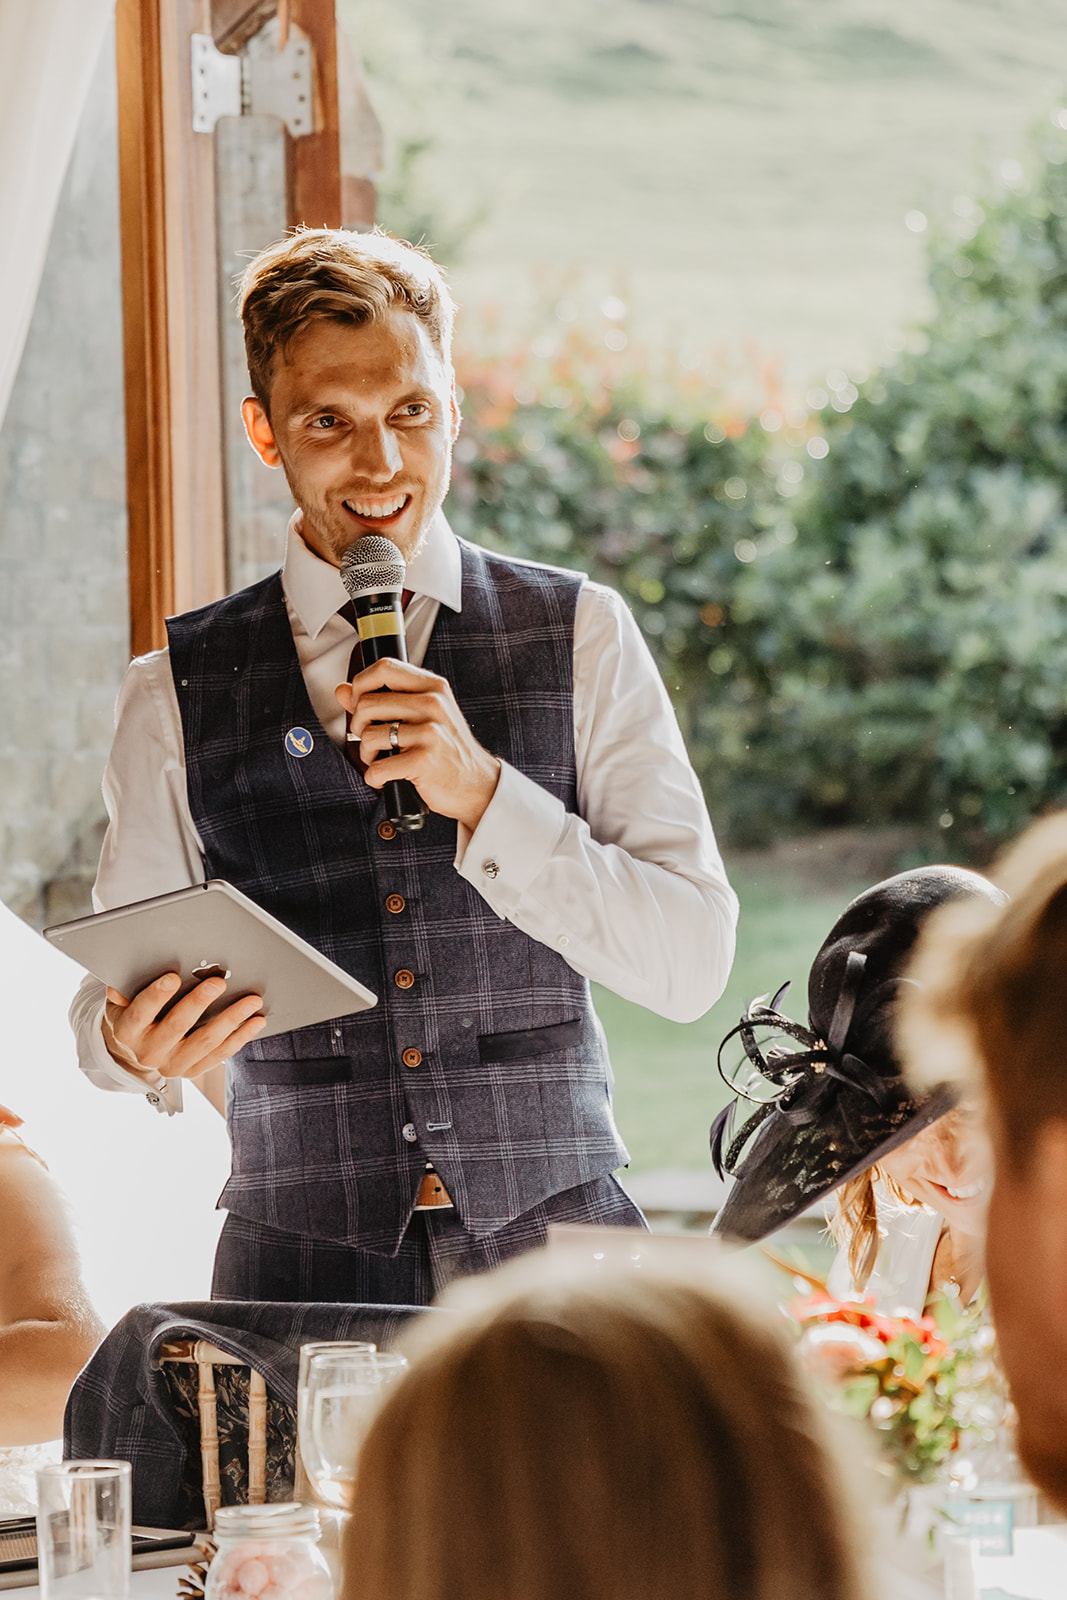 Groom speech at a wedding at Long Furlong Barn, Sussex. By OliveJoy Photography